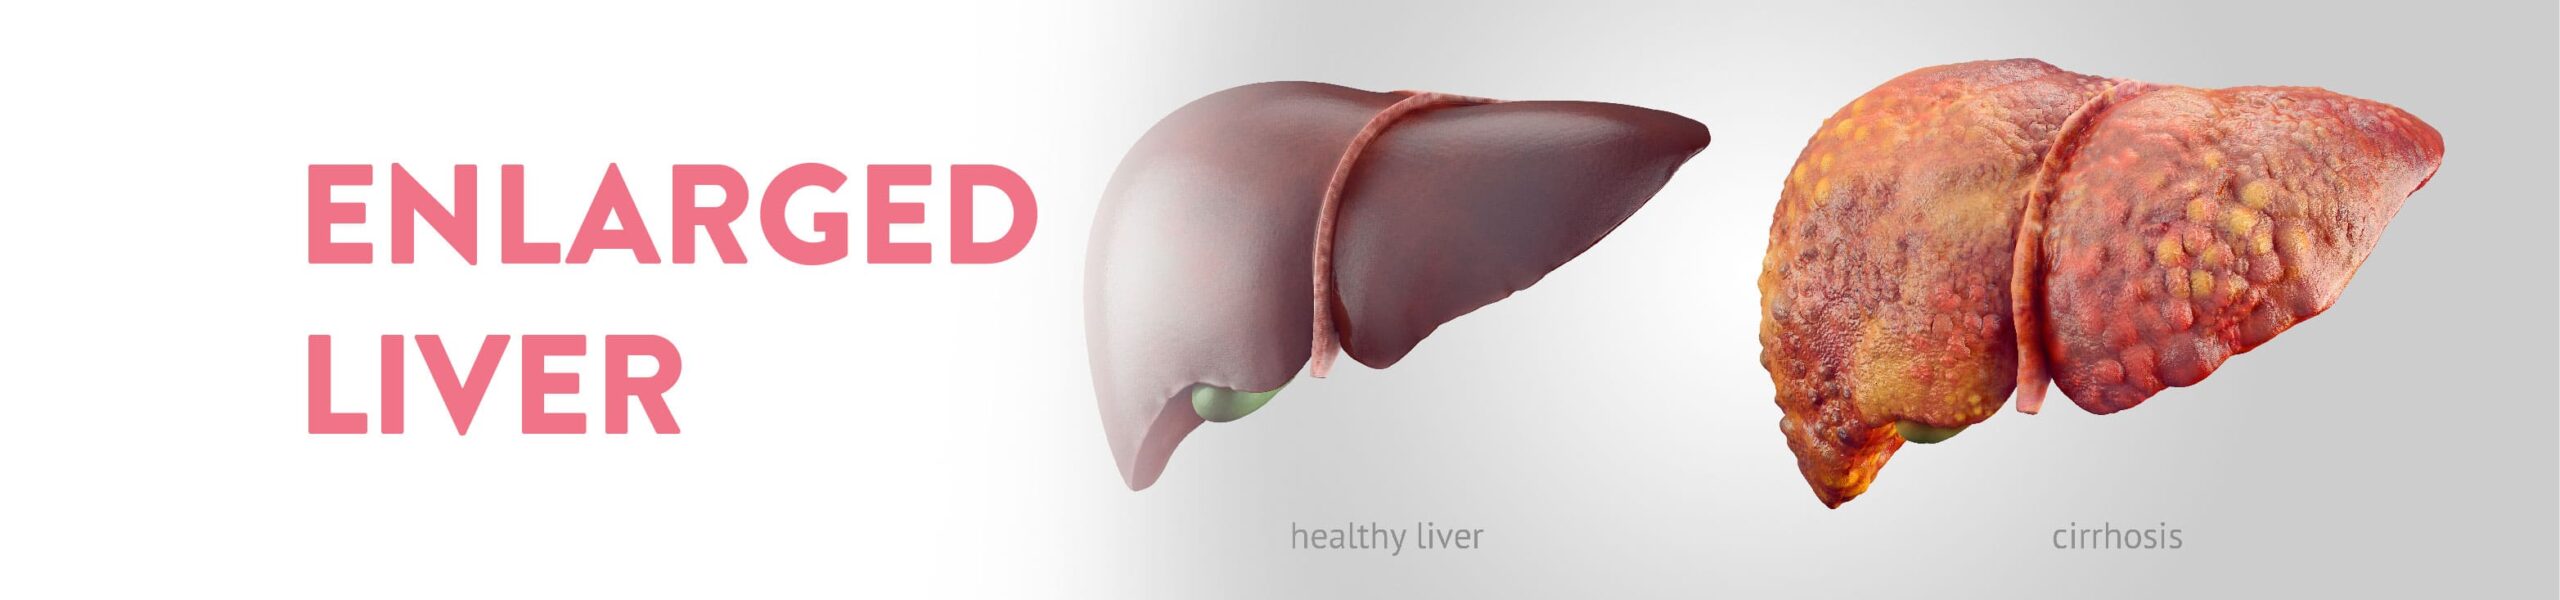 All About Enlarged Liver